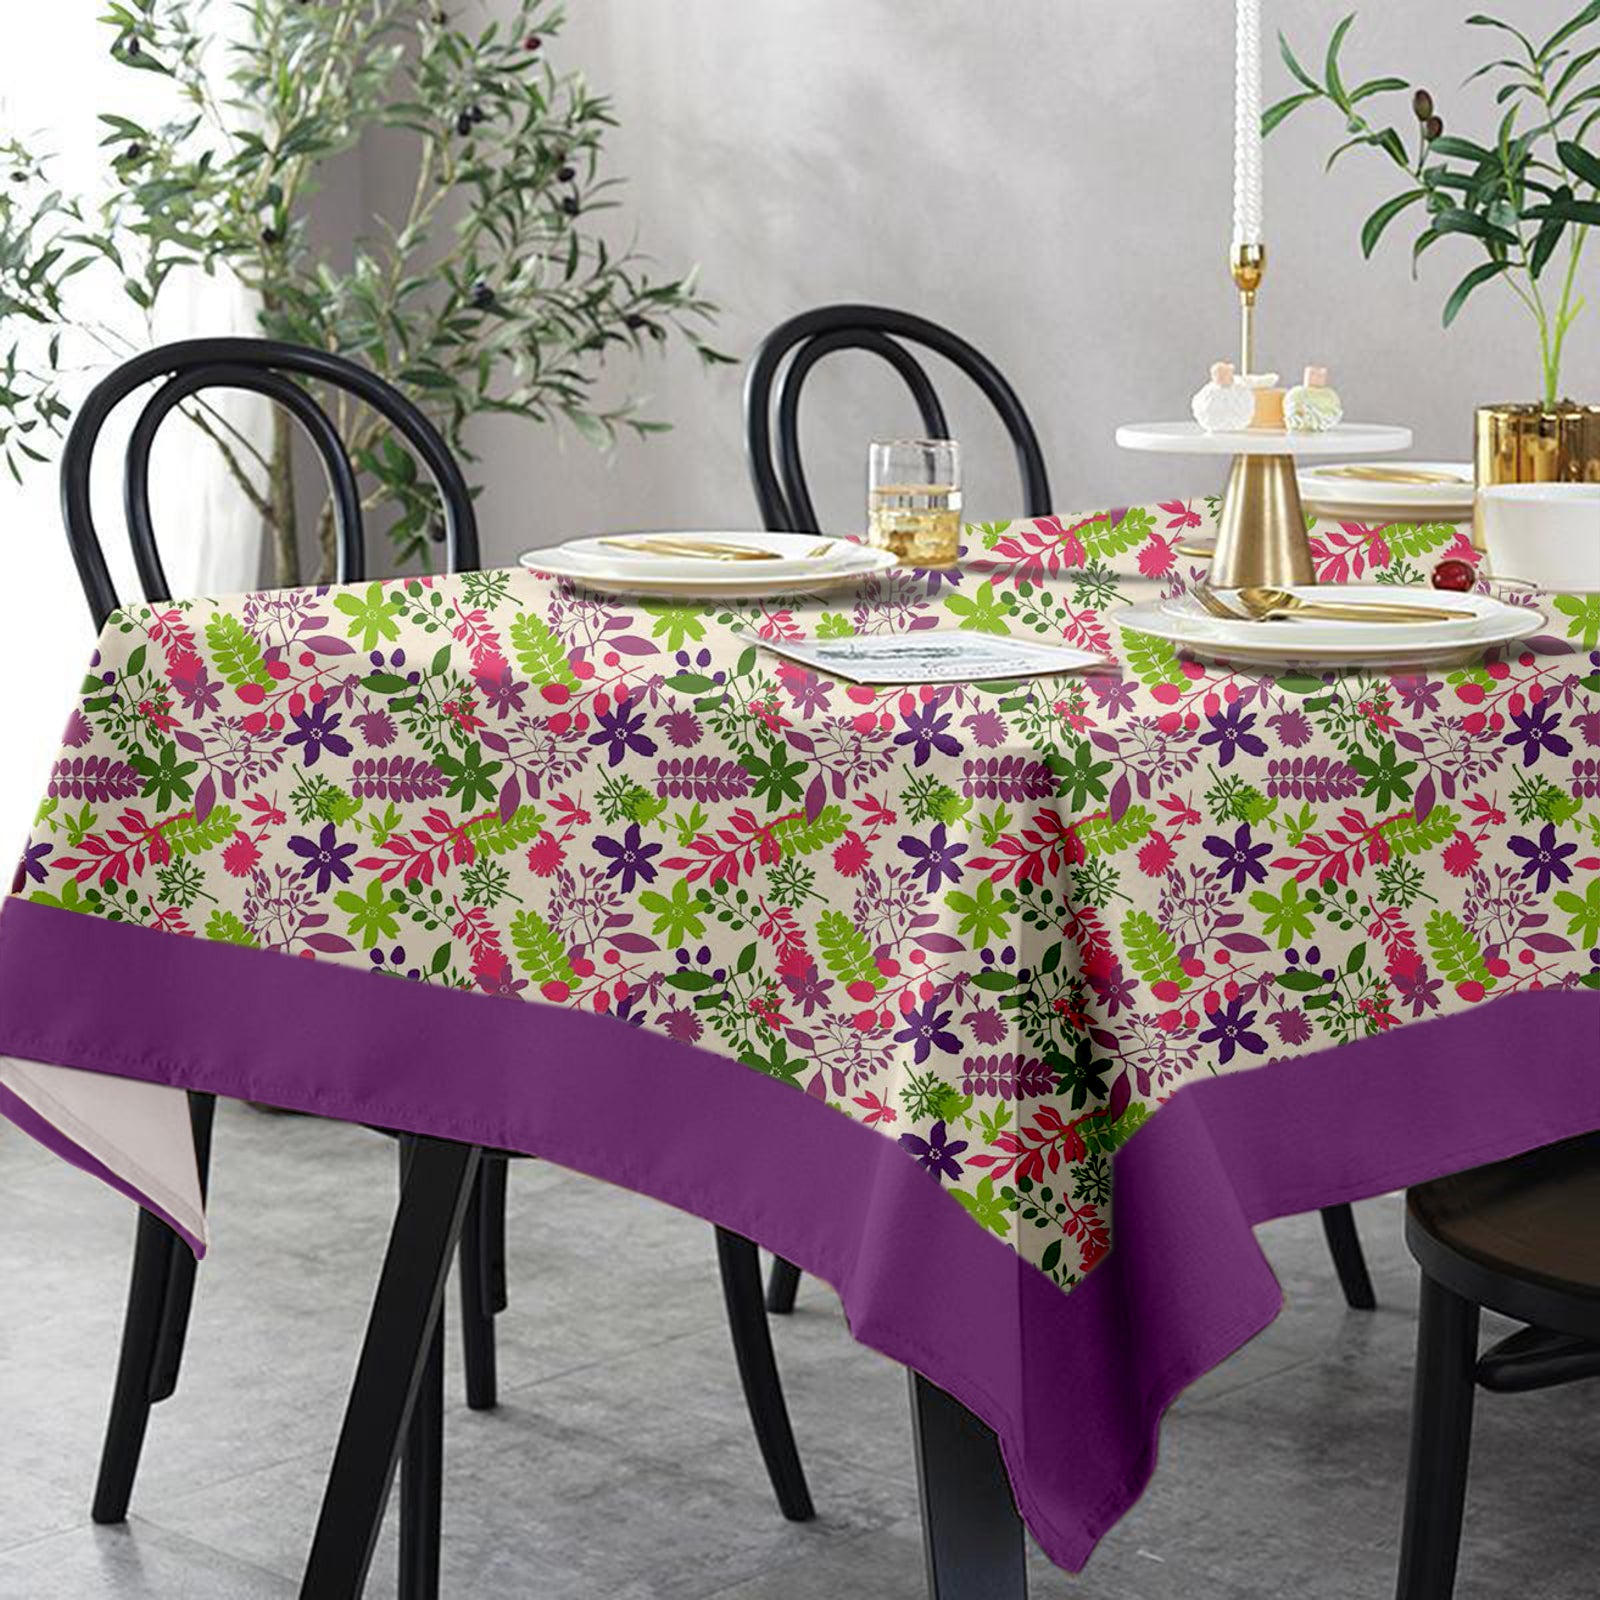 Lushomes 12 Seater Purple Printed Dining Table Cover Cloth Linen, table cloth, table cover, dinning table cover, dining table cloth (Size- 120 x 70 Inches, Single Pc )